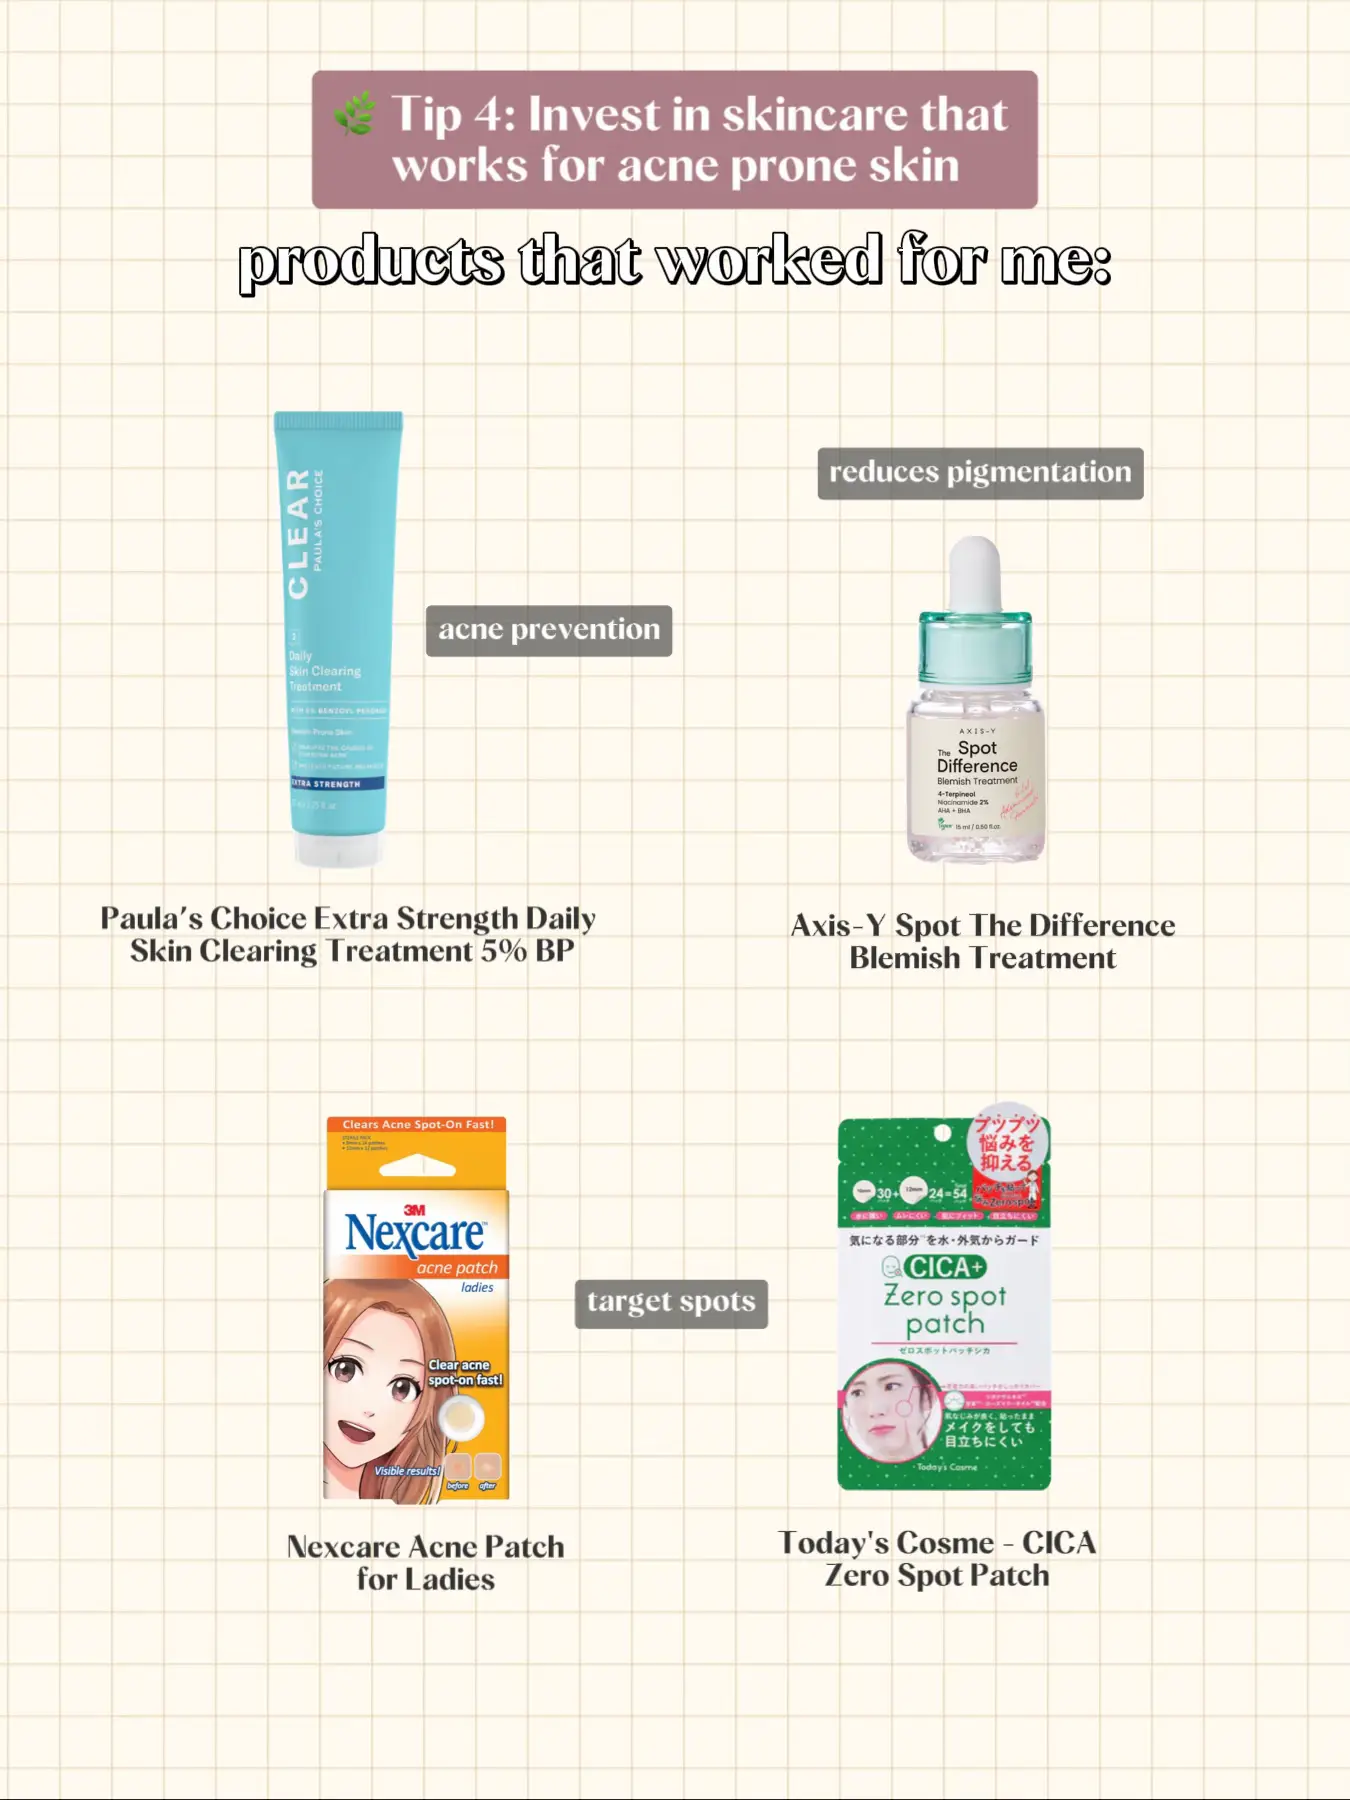 Acne tips and products that changed my life 😭's images(6)